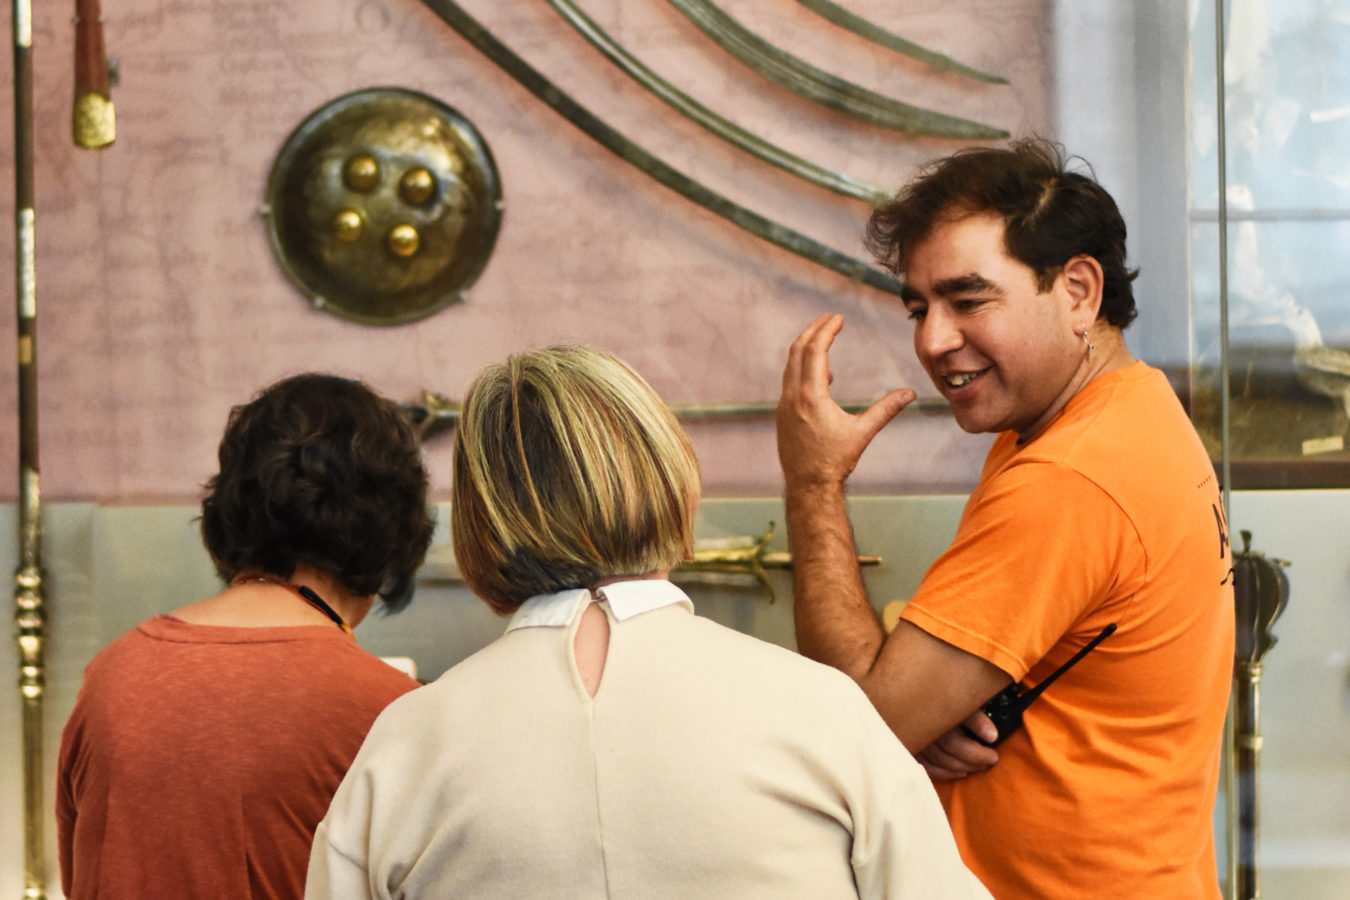 Staff talking to visitors in the Explorers Gallery